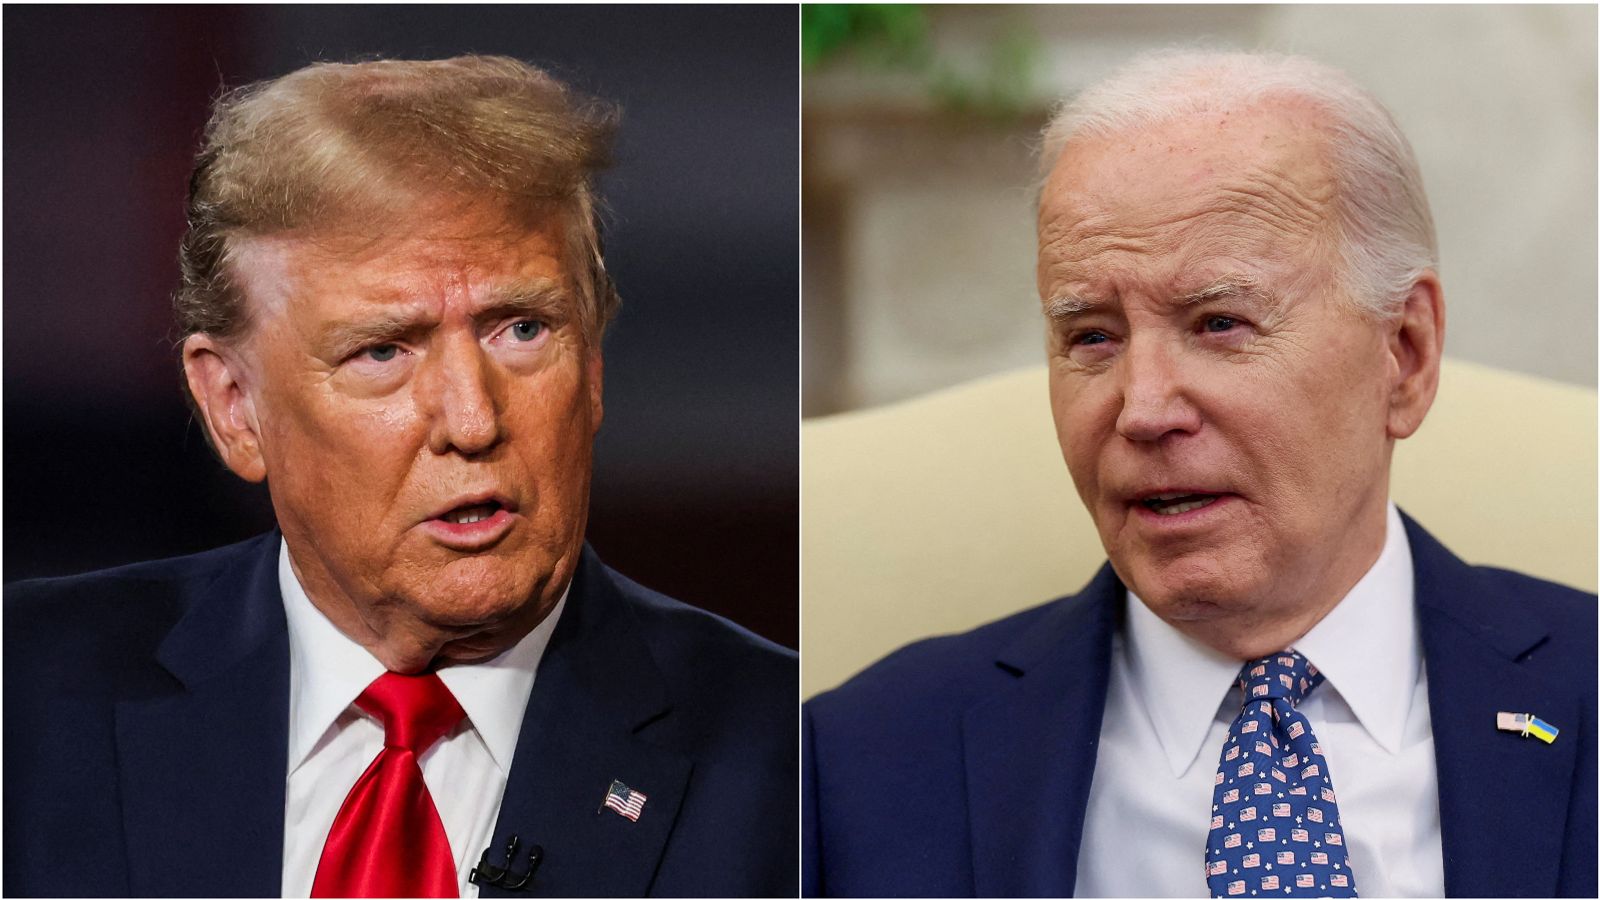 US presidential debate: Live event might expose ageing Biden while lack of audience could stump Trump